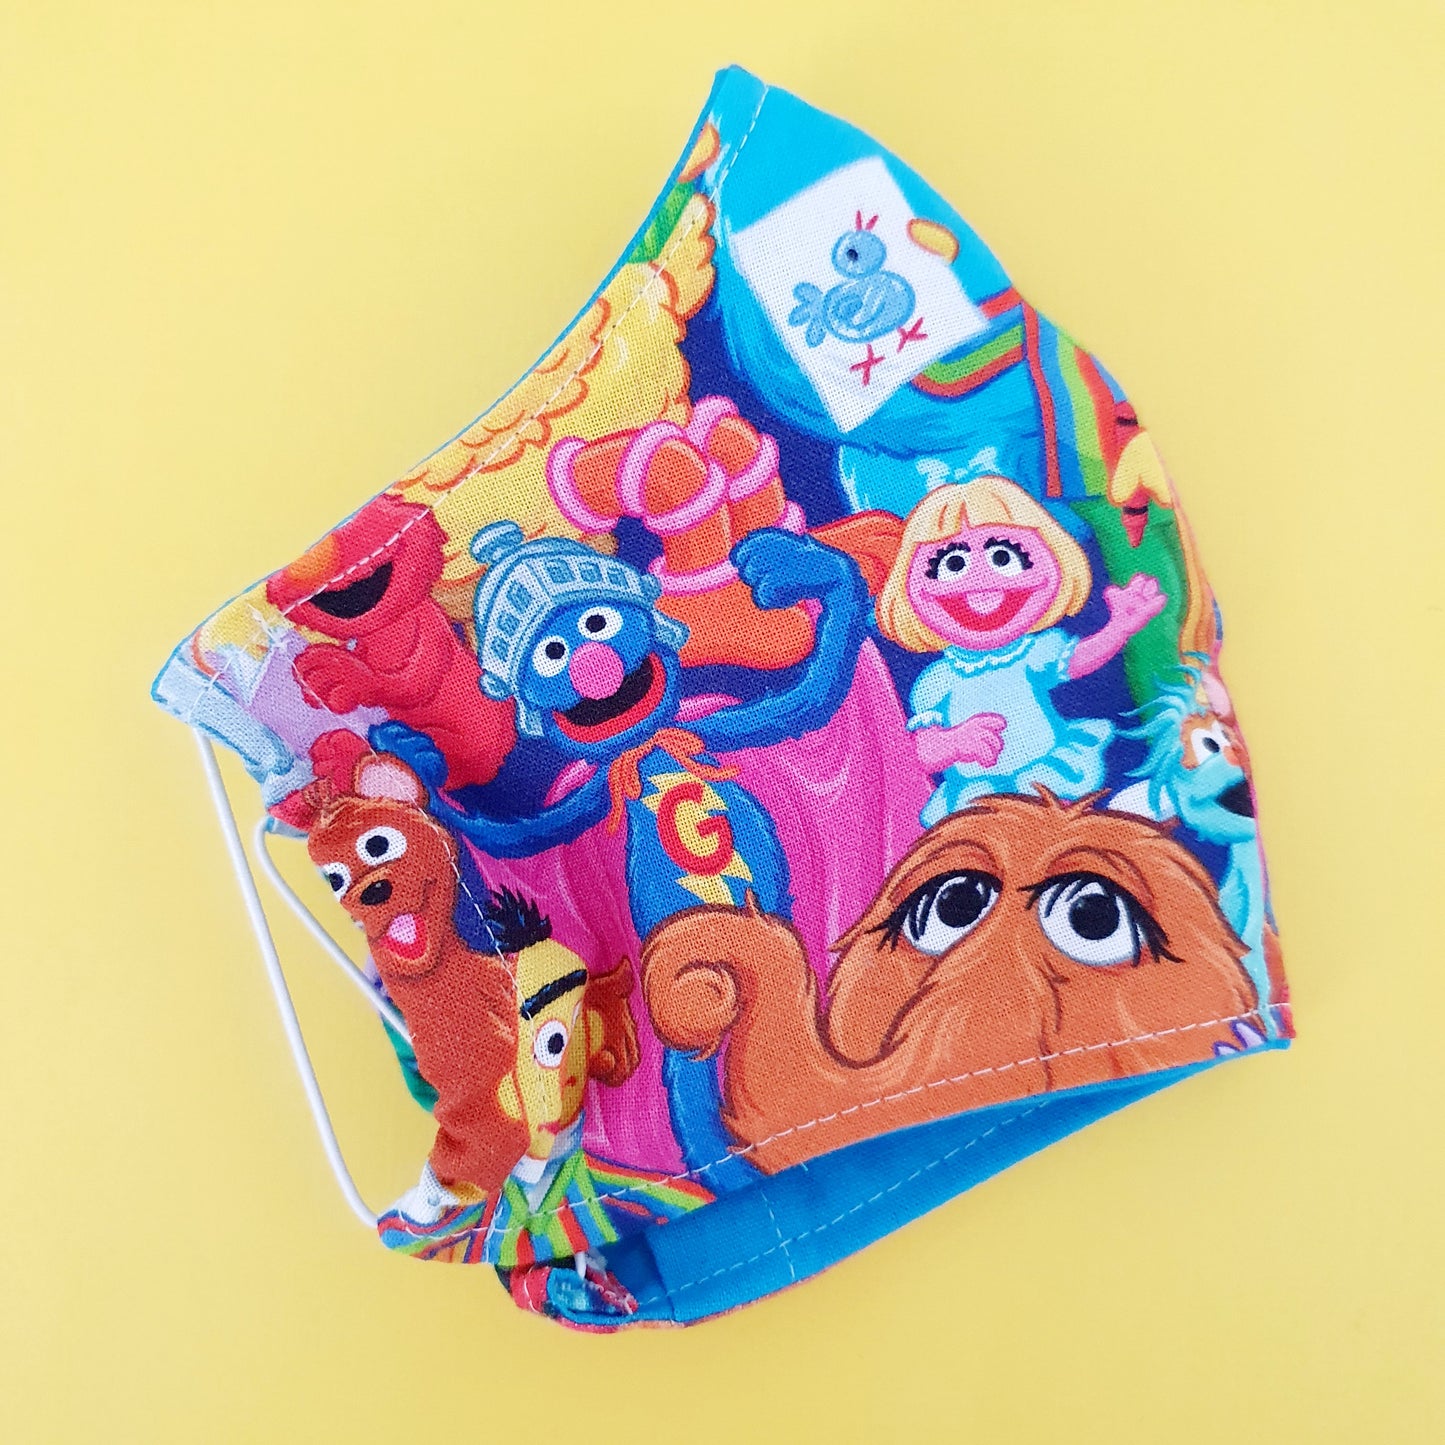 CHILD (Approx 4-10yrs) FACE MASK - Reusable,  Washable,  3 Layers 100% Cotton (Includes Filter Pocket)